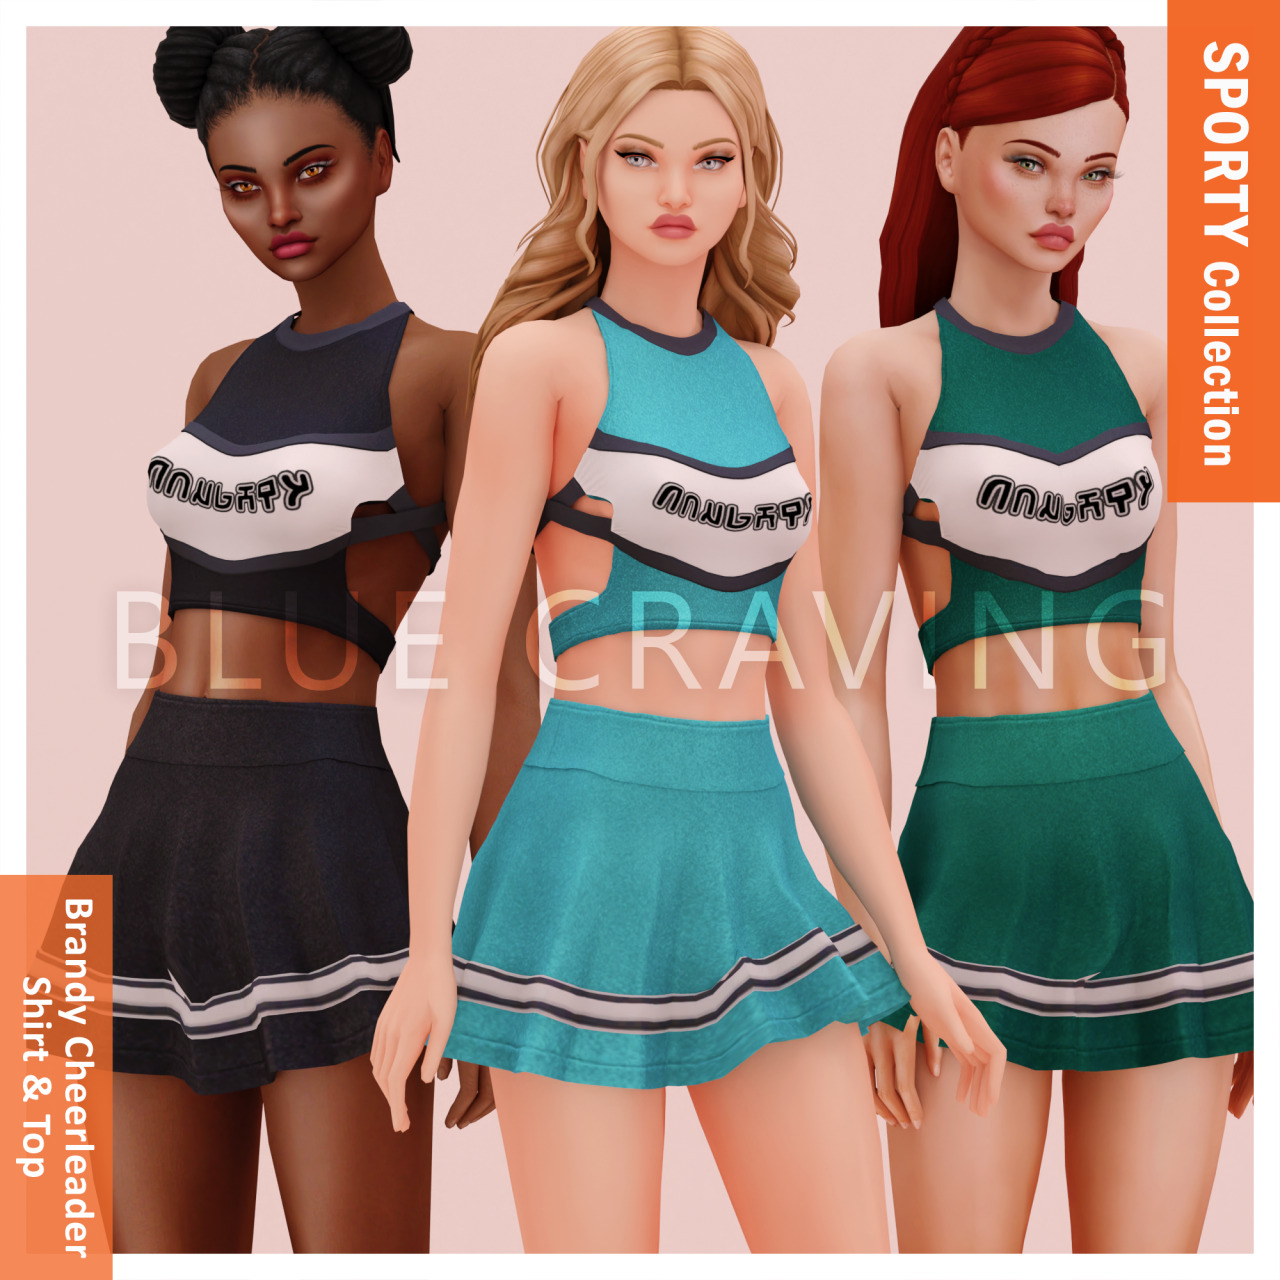 Sims 4 Cc Cheerleader Collection There Is The Blue Craving